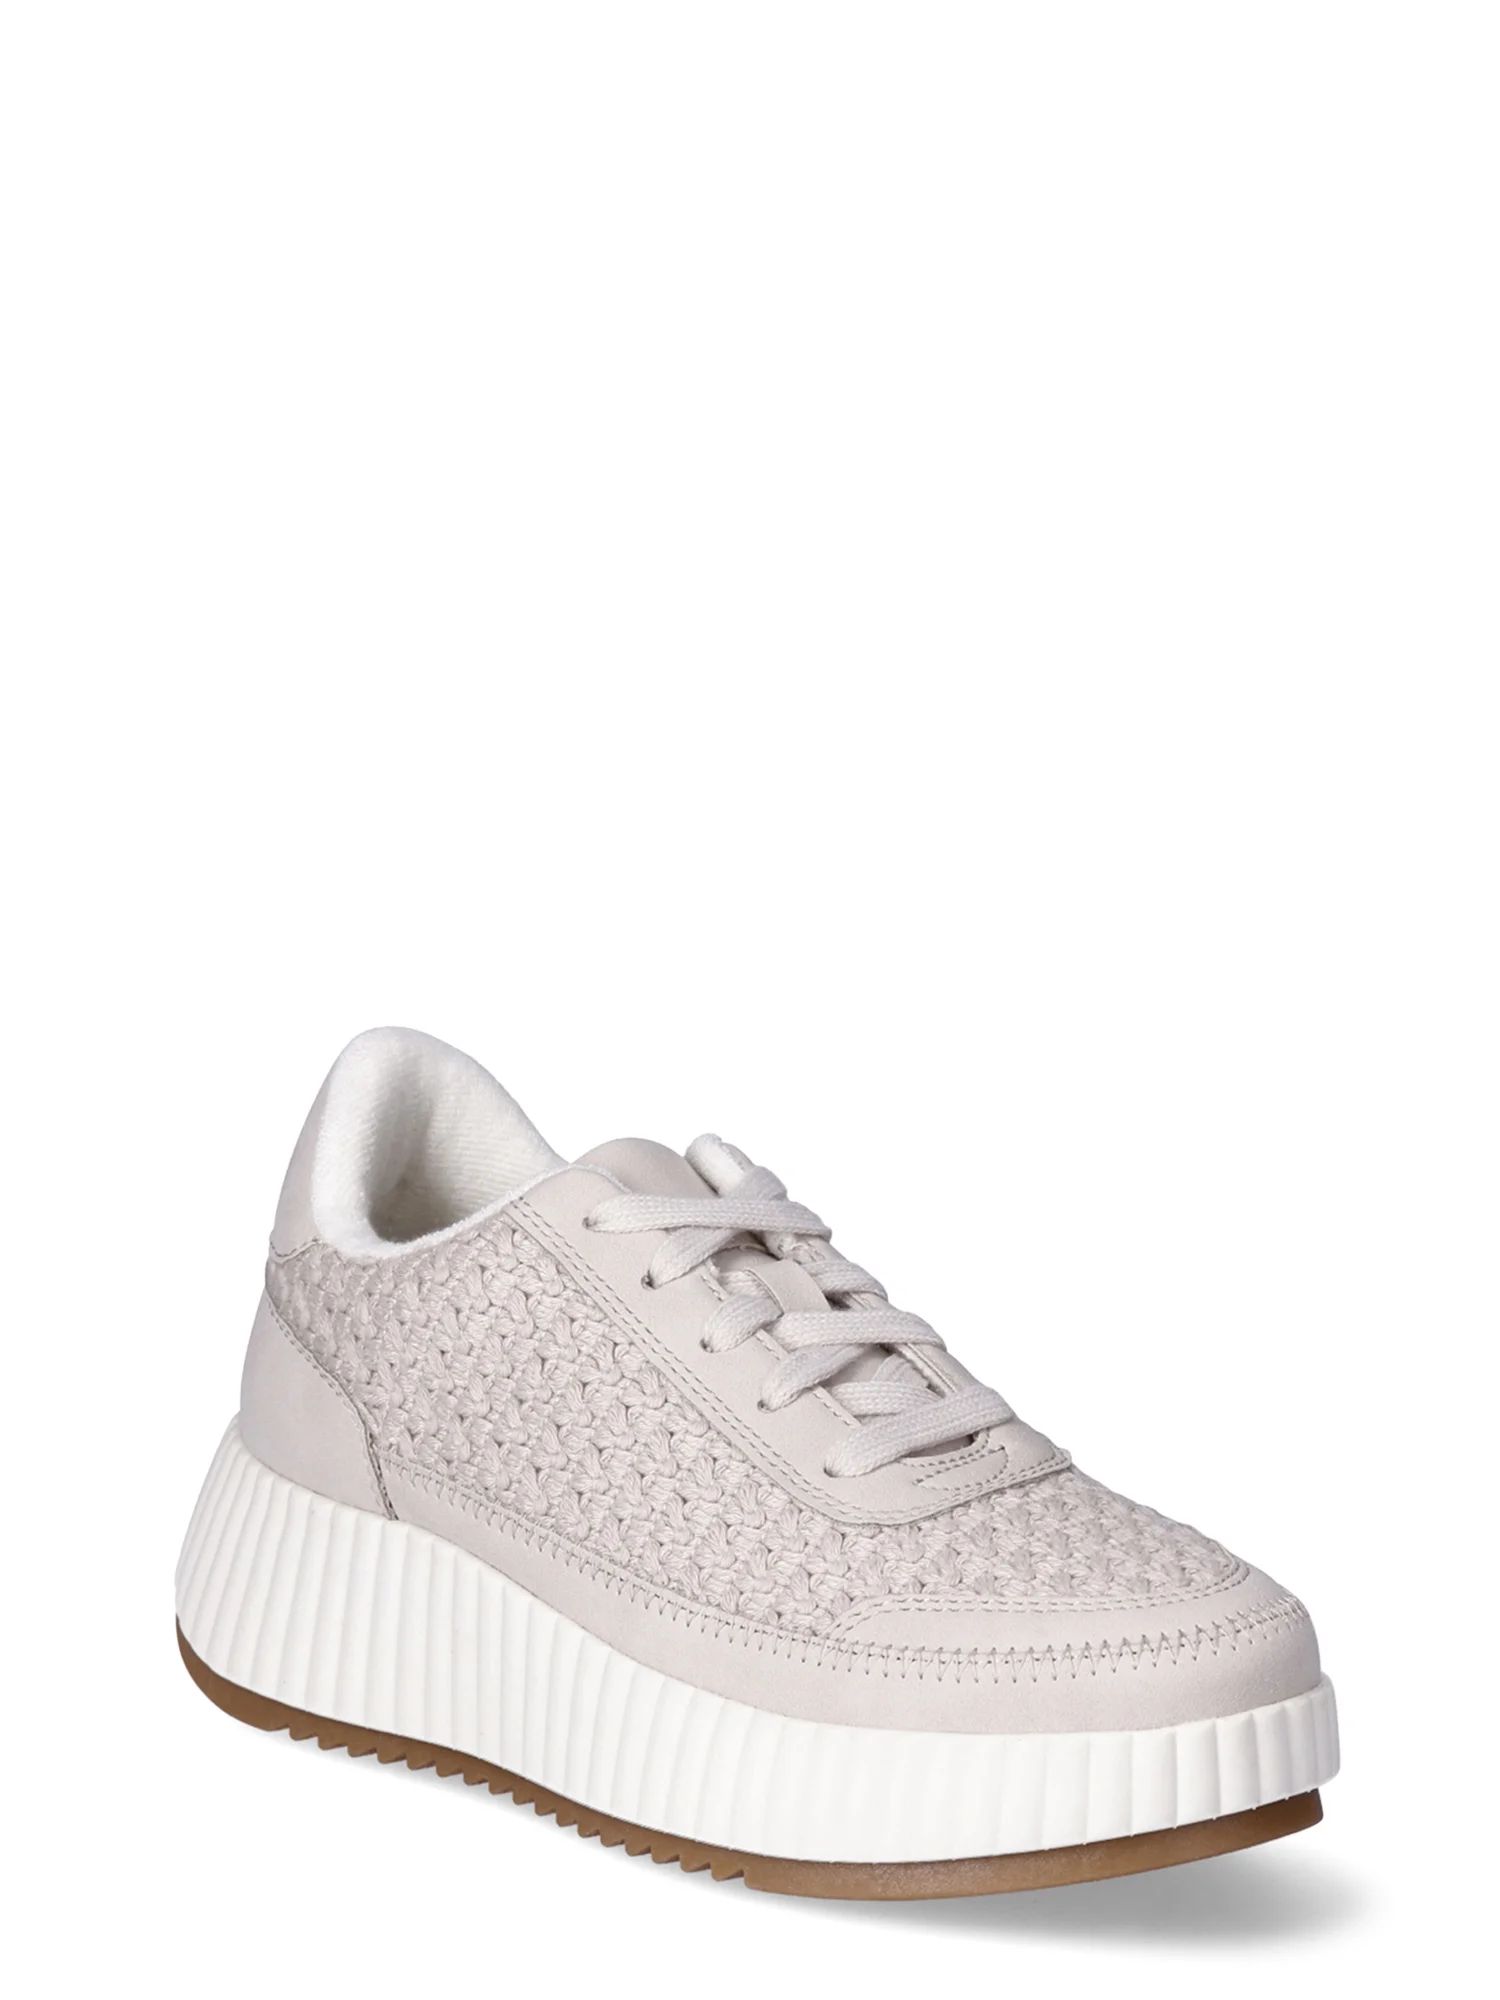 Madden NYC Women's Disco Platform Lace-Up Sneakers | Walmart (US)